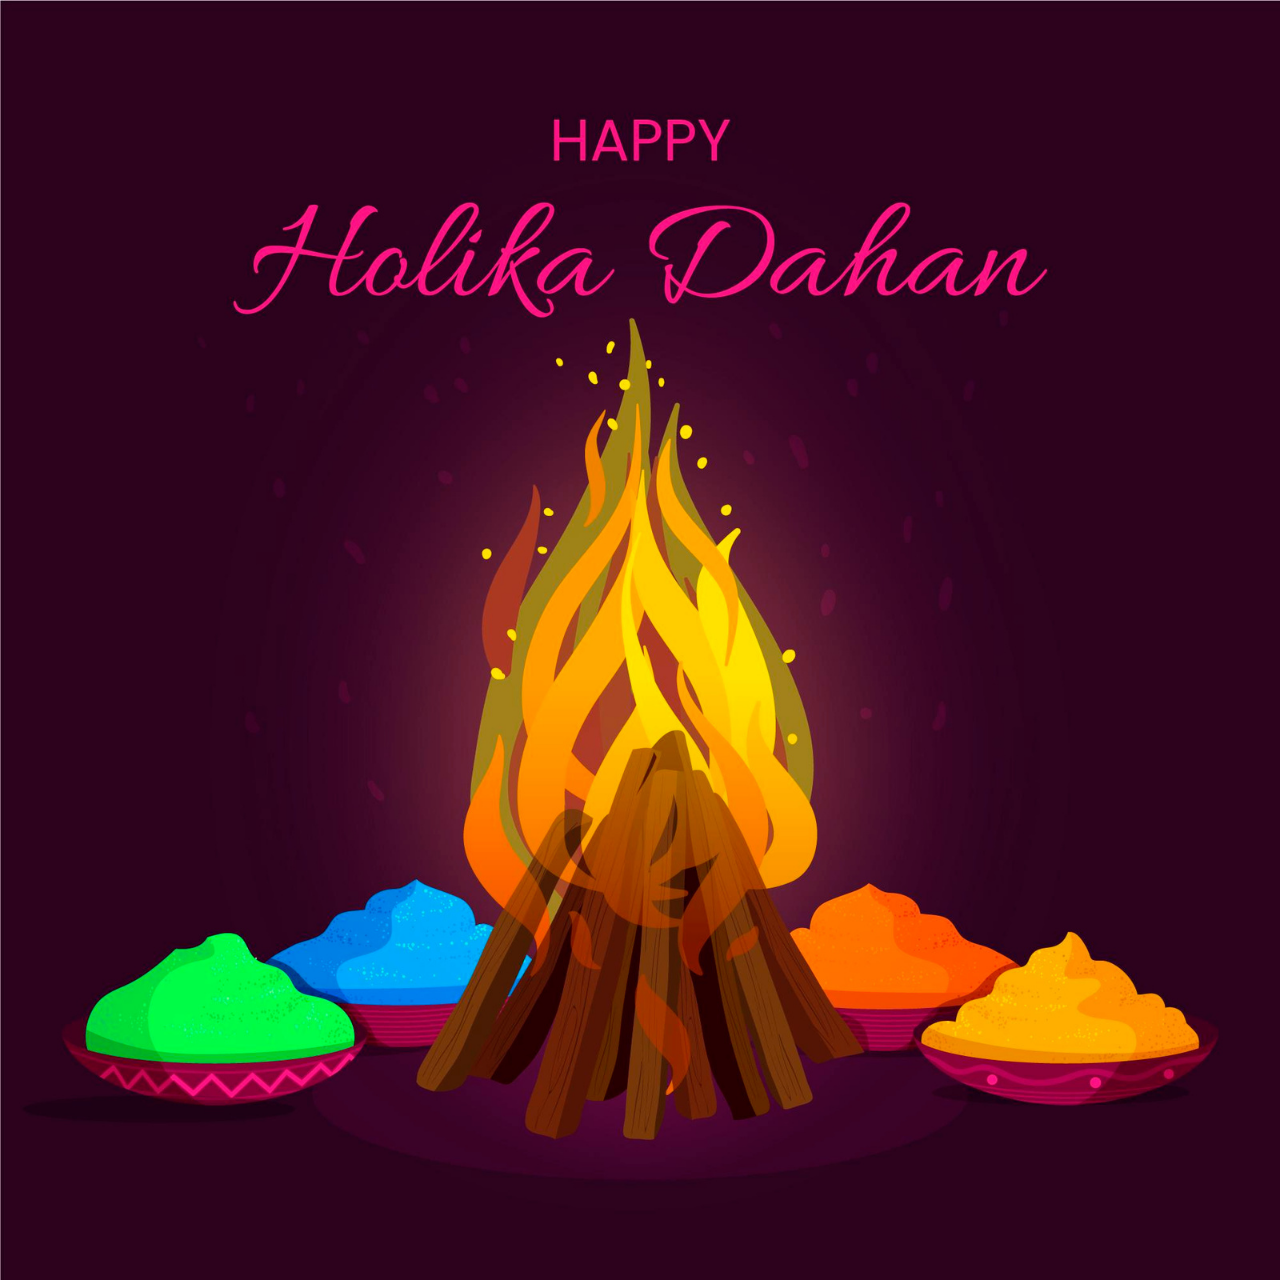 Holika Dahan 2022 Instagram Captions, WhatsApp Stickers, Twitter Posts, Pinterest Images, and Reddit Quotes to Share